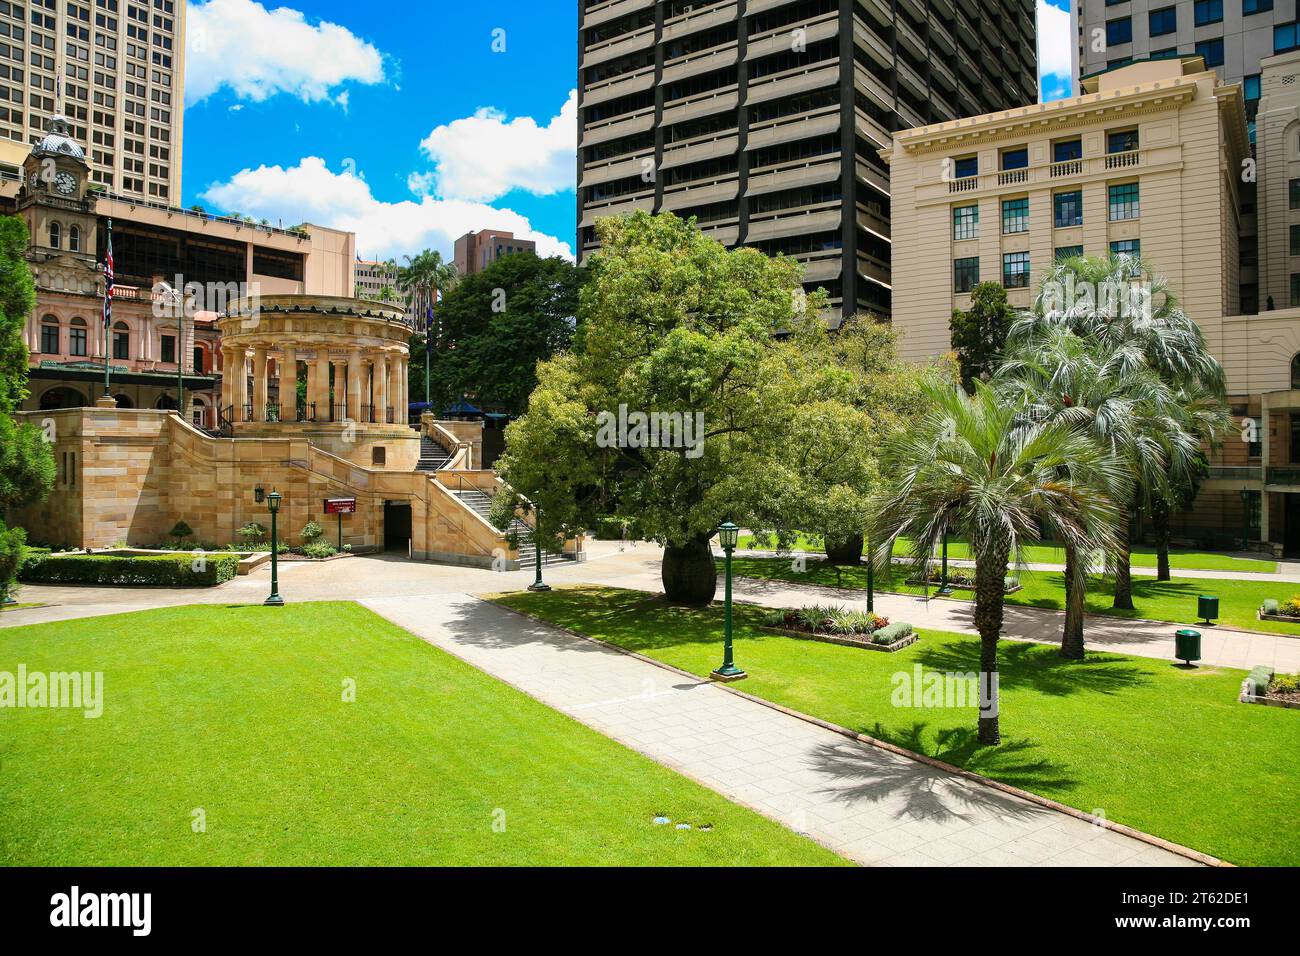 .Brisbane, QLD, Australia - January 28, 2008 : Anzac Square. Relaxed city square with walking paths, lawns and a large memorial to World War One. Stock Photo